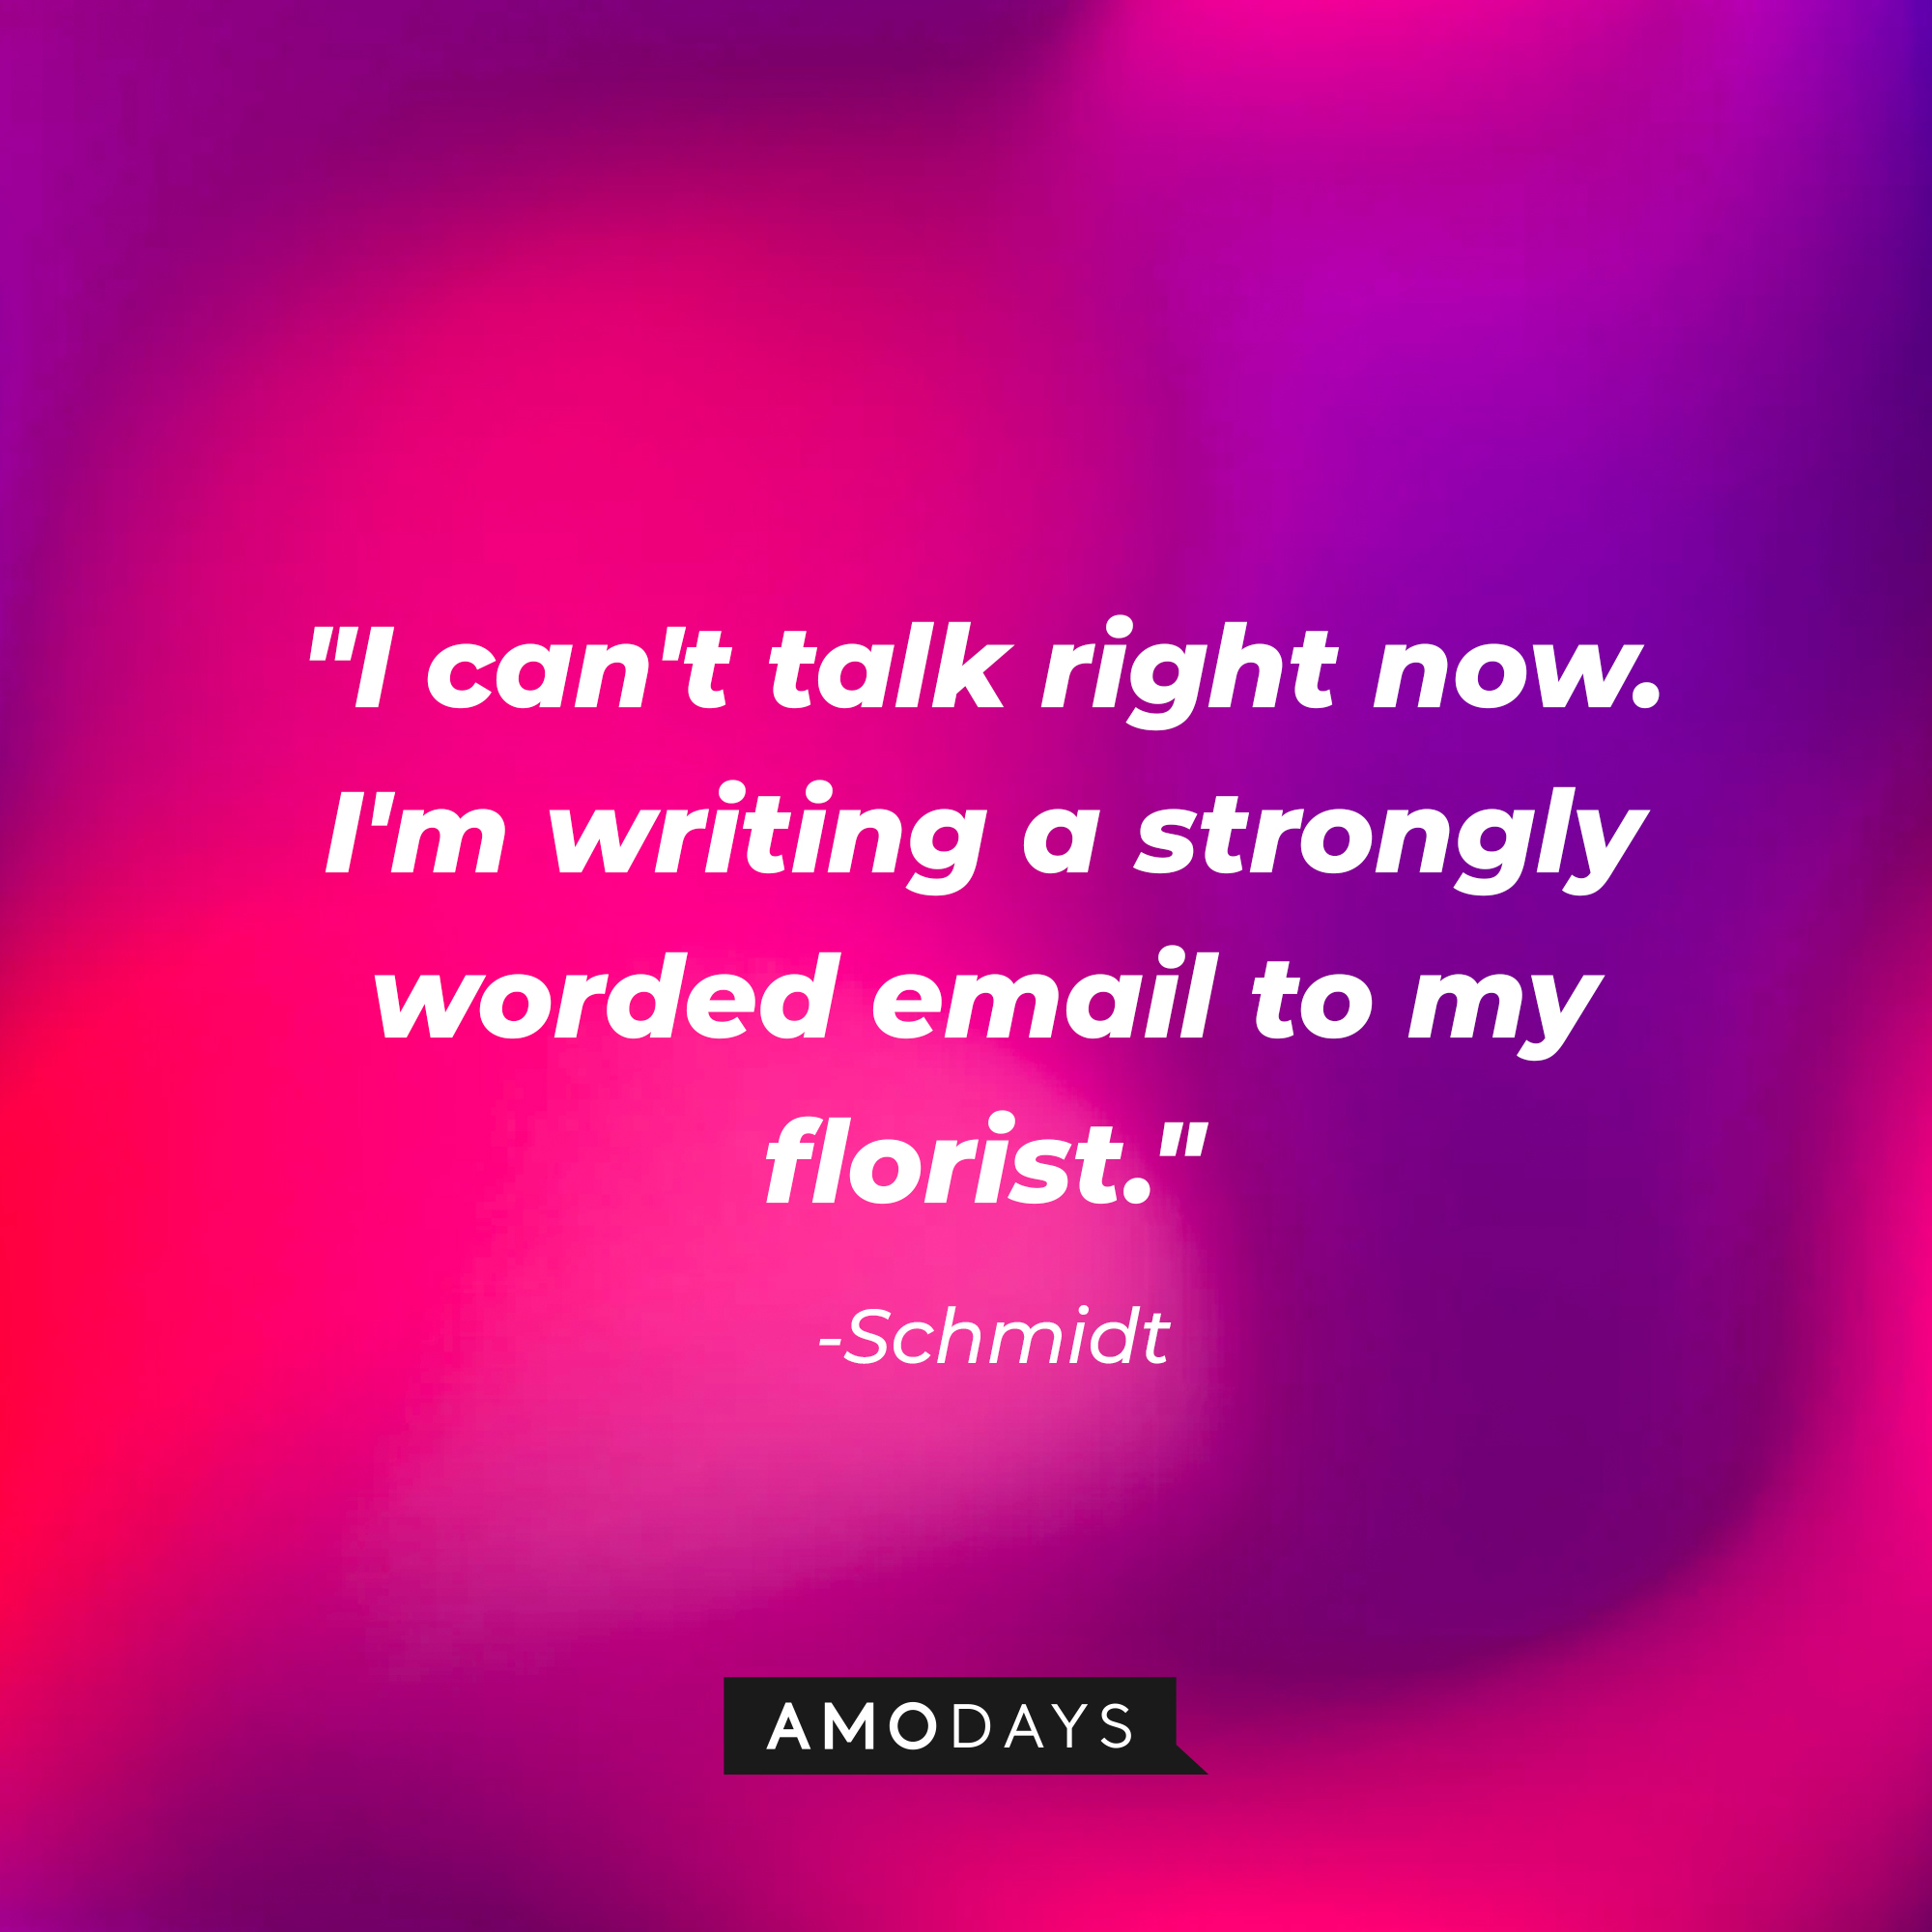 Schmidt's quote, "I can't talk right now. I'm writing a strongly worded email to my florist." | Source: Amodays